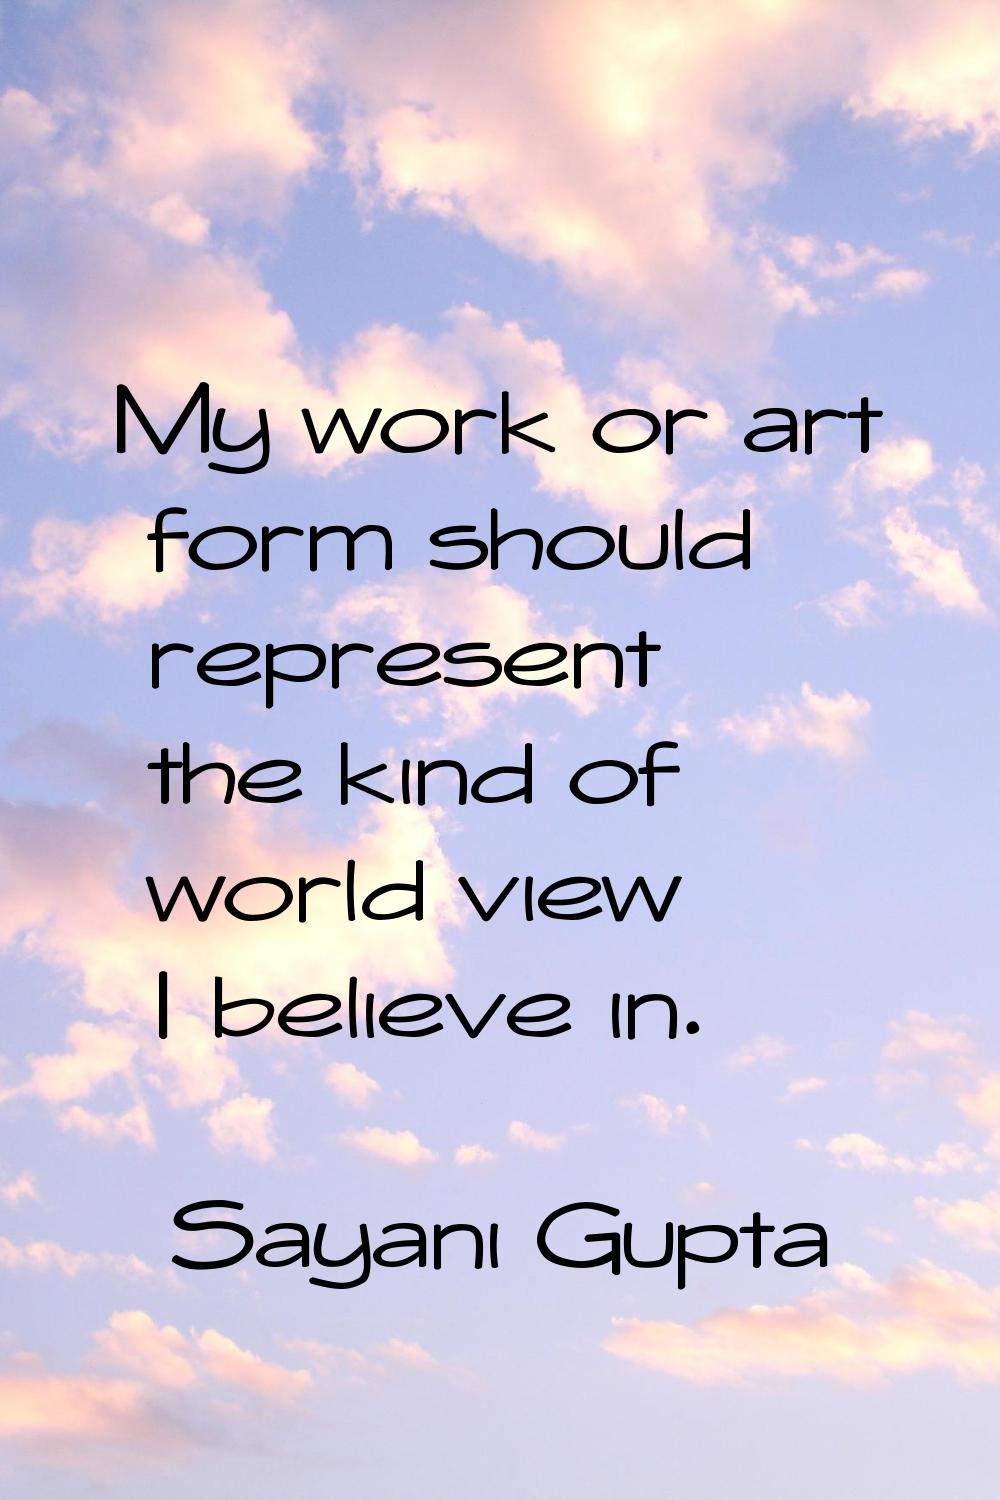 My work or art form should represent the kind of world view I believe in.